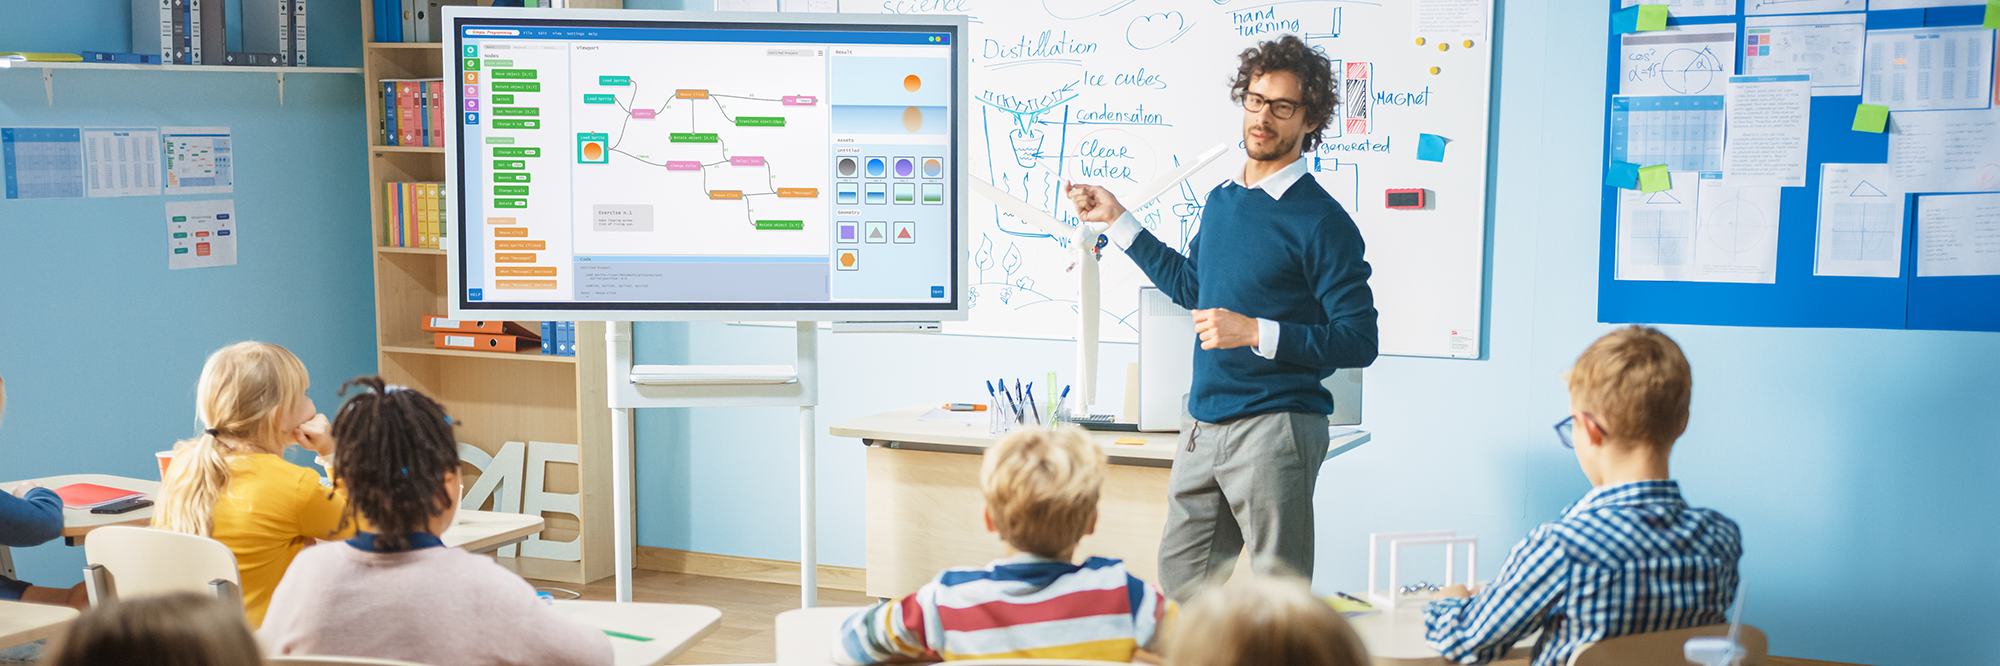 teacher pointing at an interactive whiteboard in front of his class